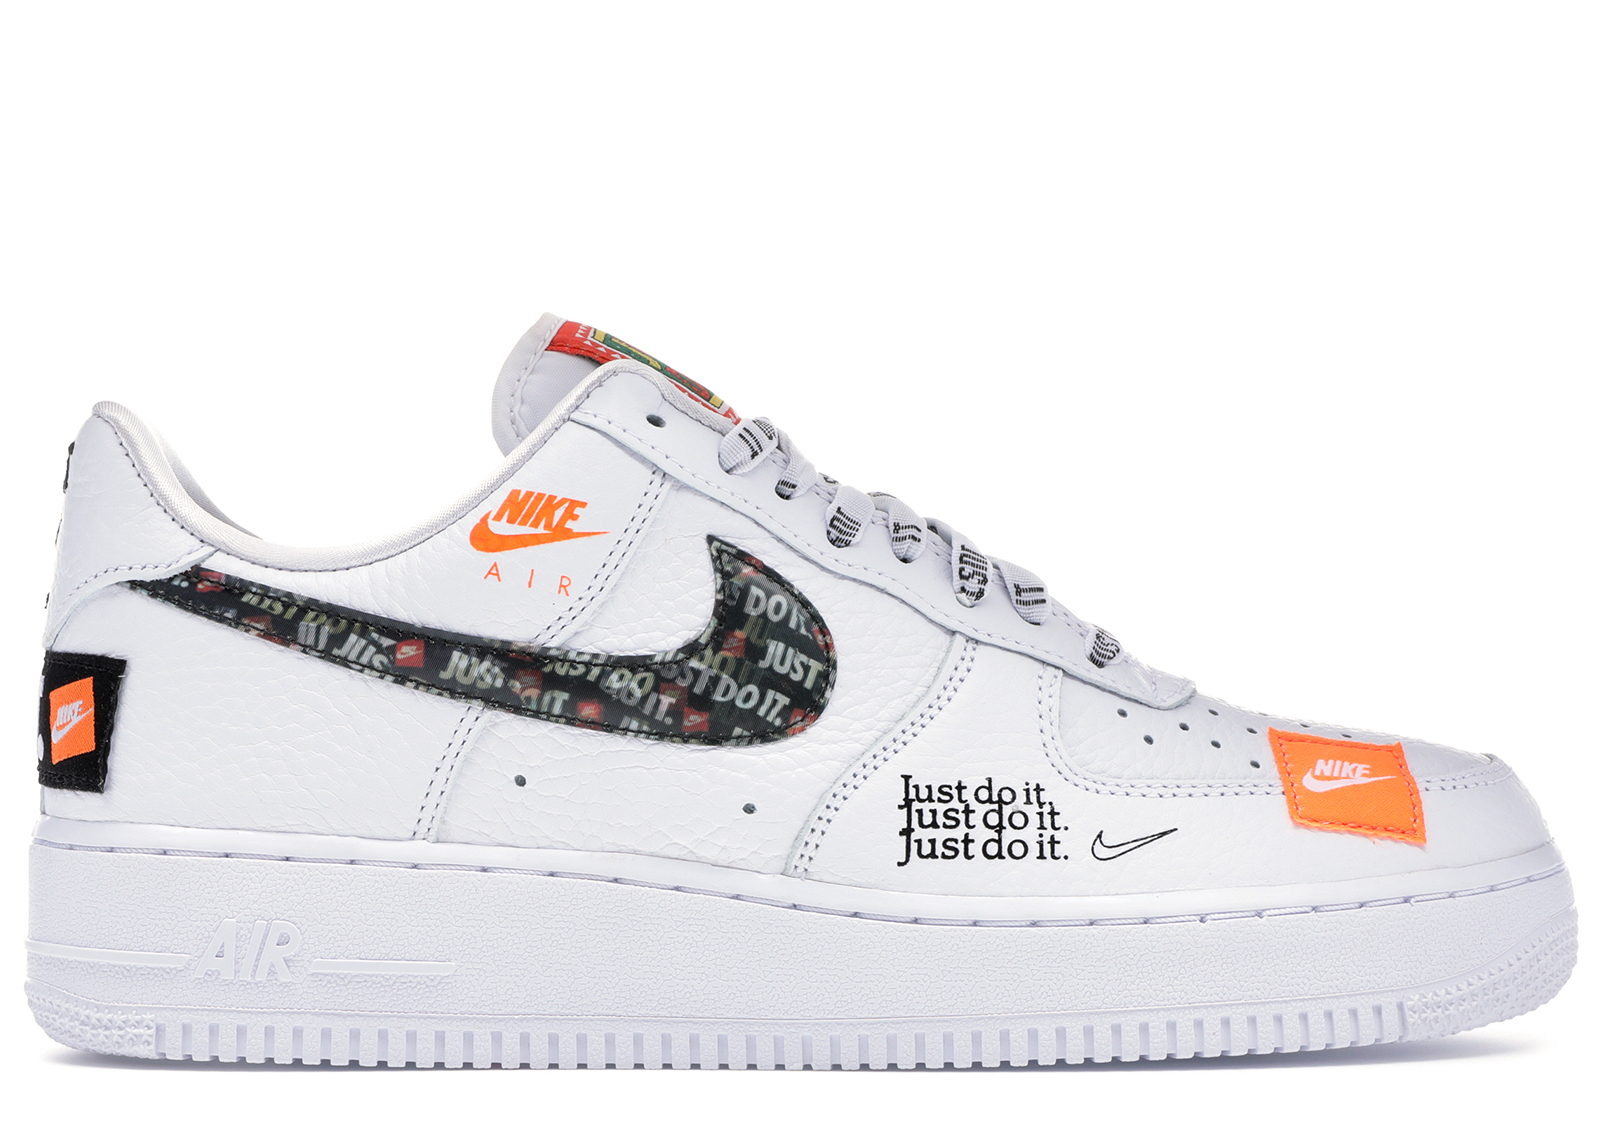 Nike Air Force 1 Low Just Do It Pack White/Black نكهة بيت